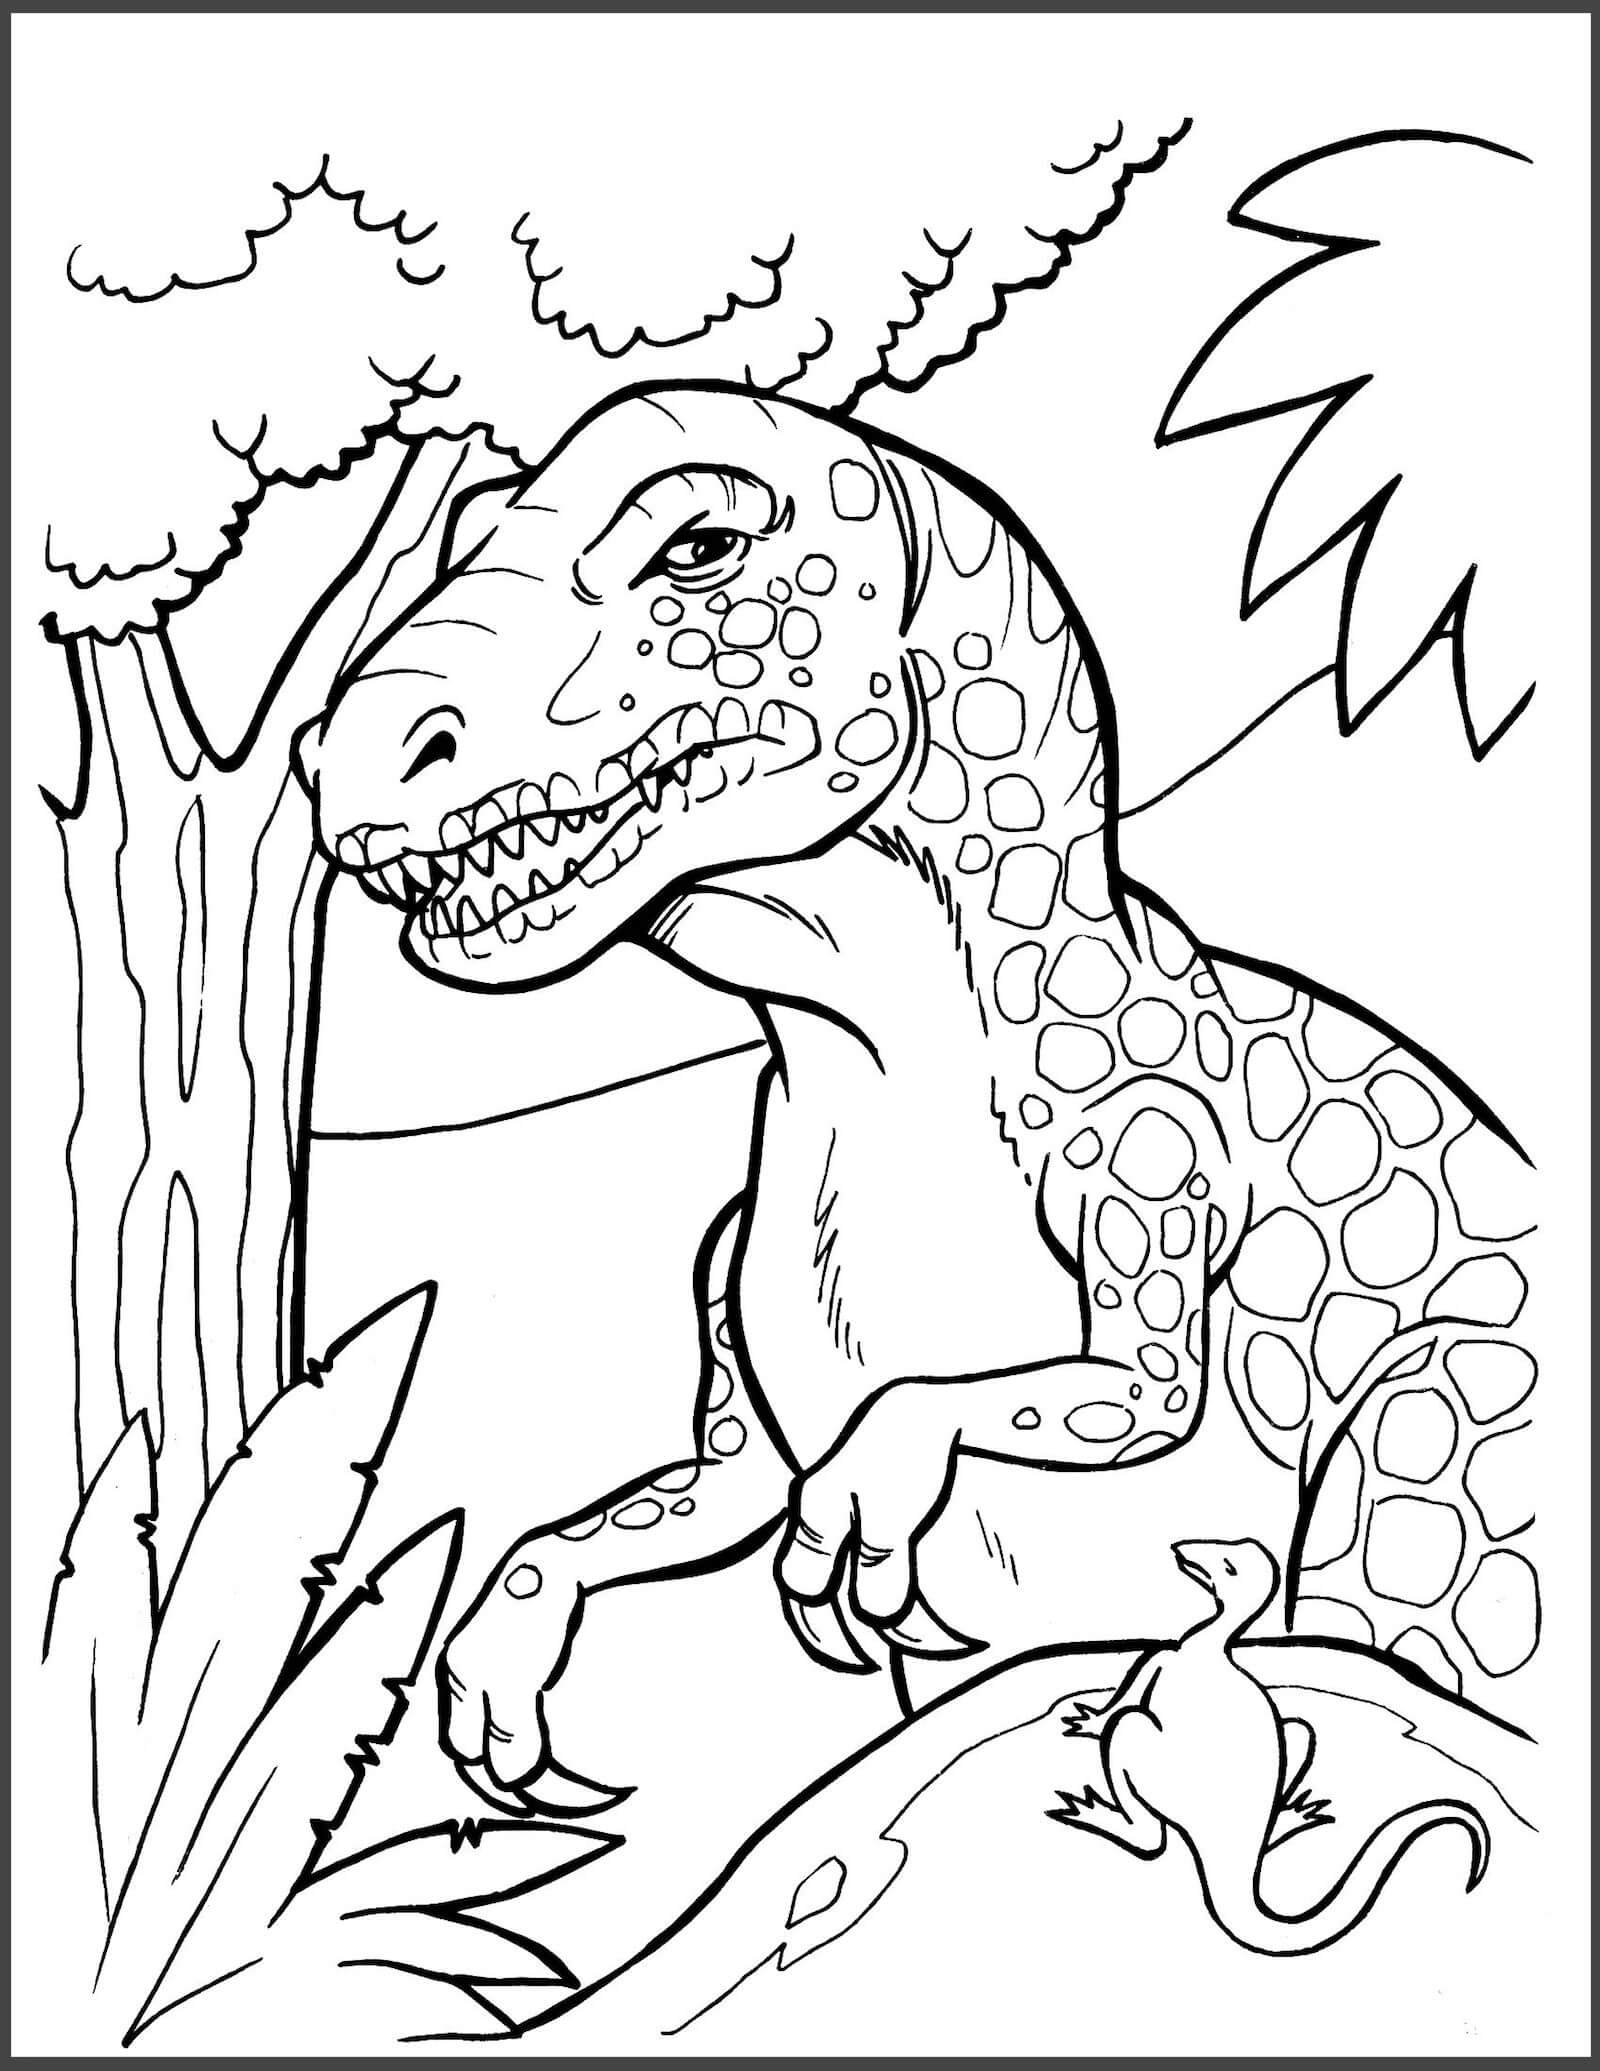 Dinosaure T-Rex coloring page